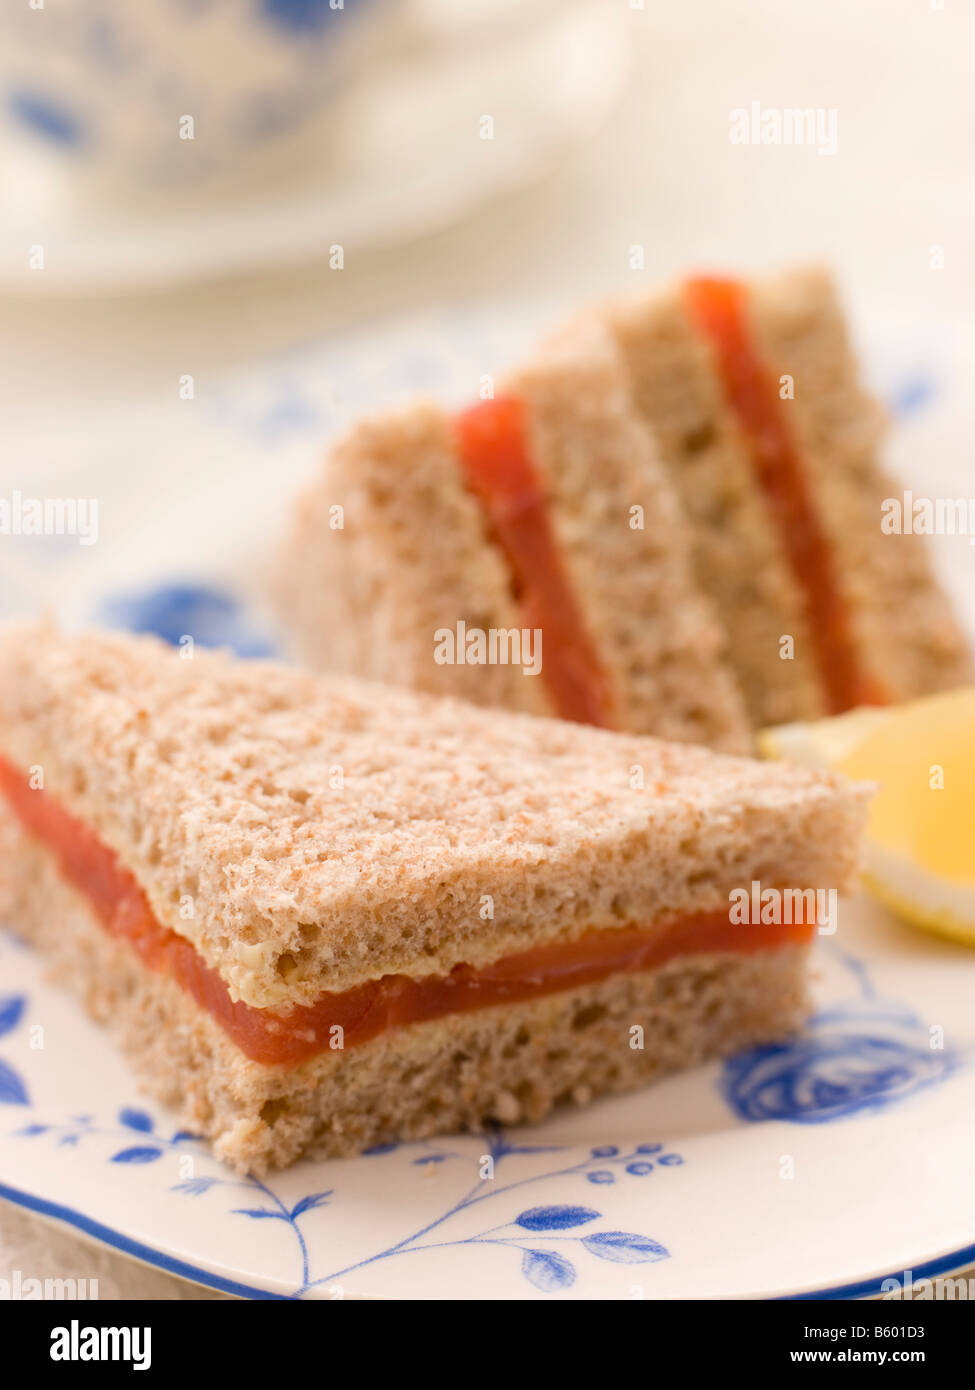 Smoked Salmon Sandwich on Brown Bread with Afternoon Tea Stock Photo